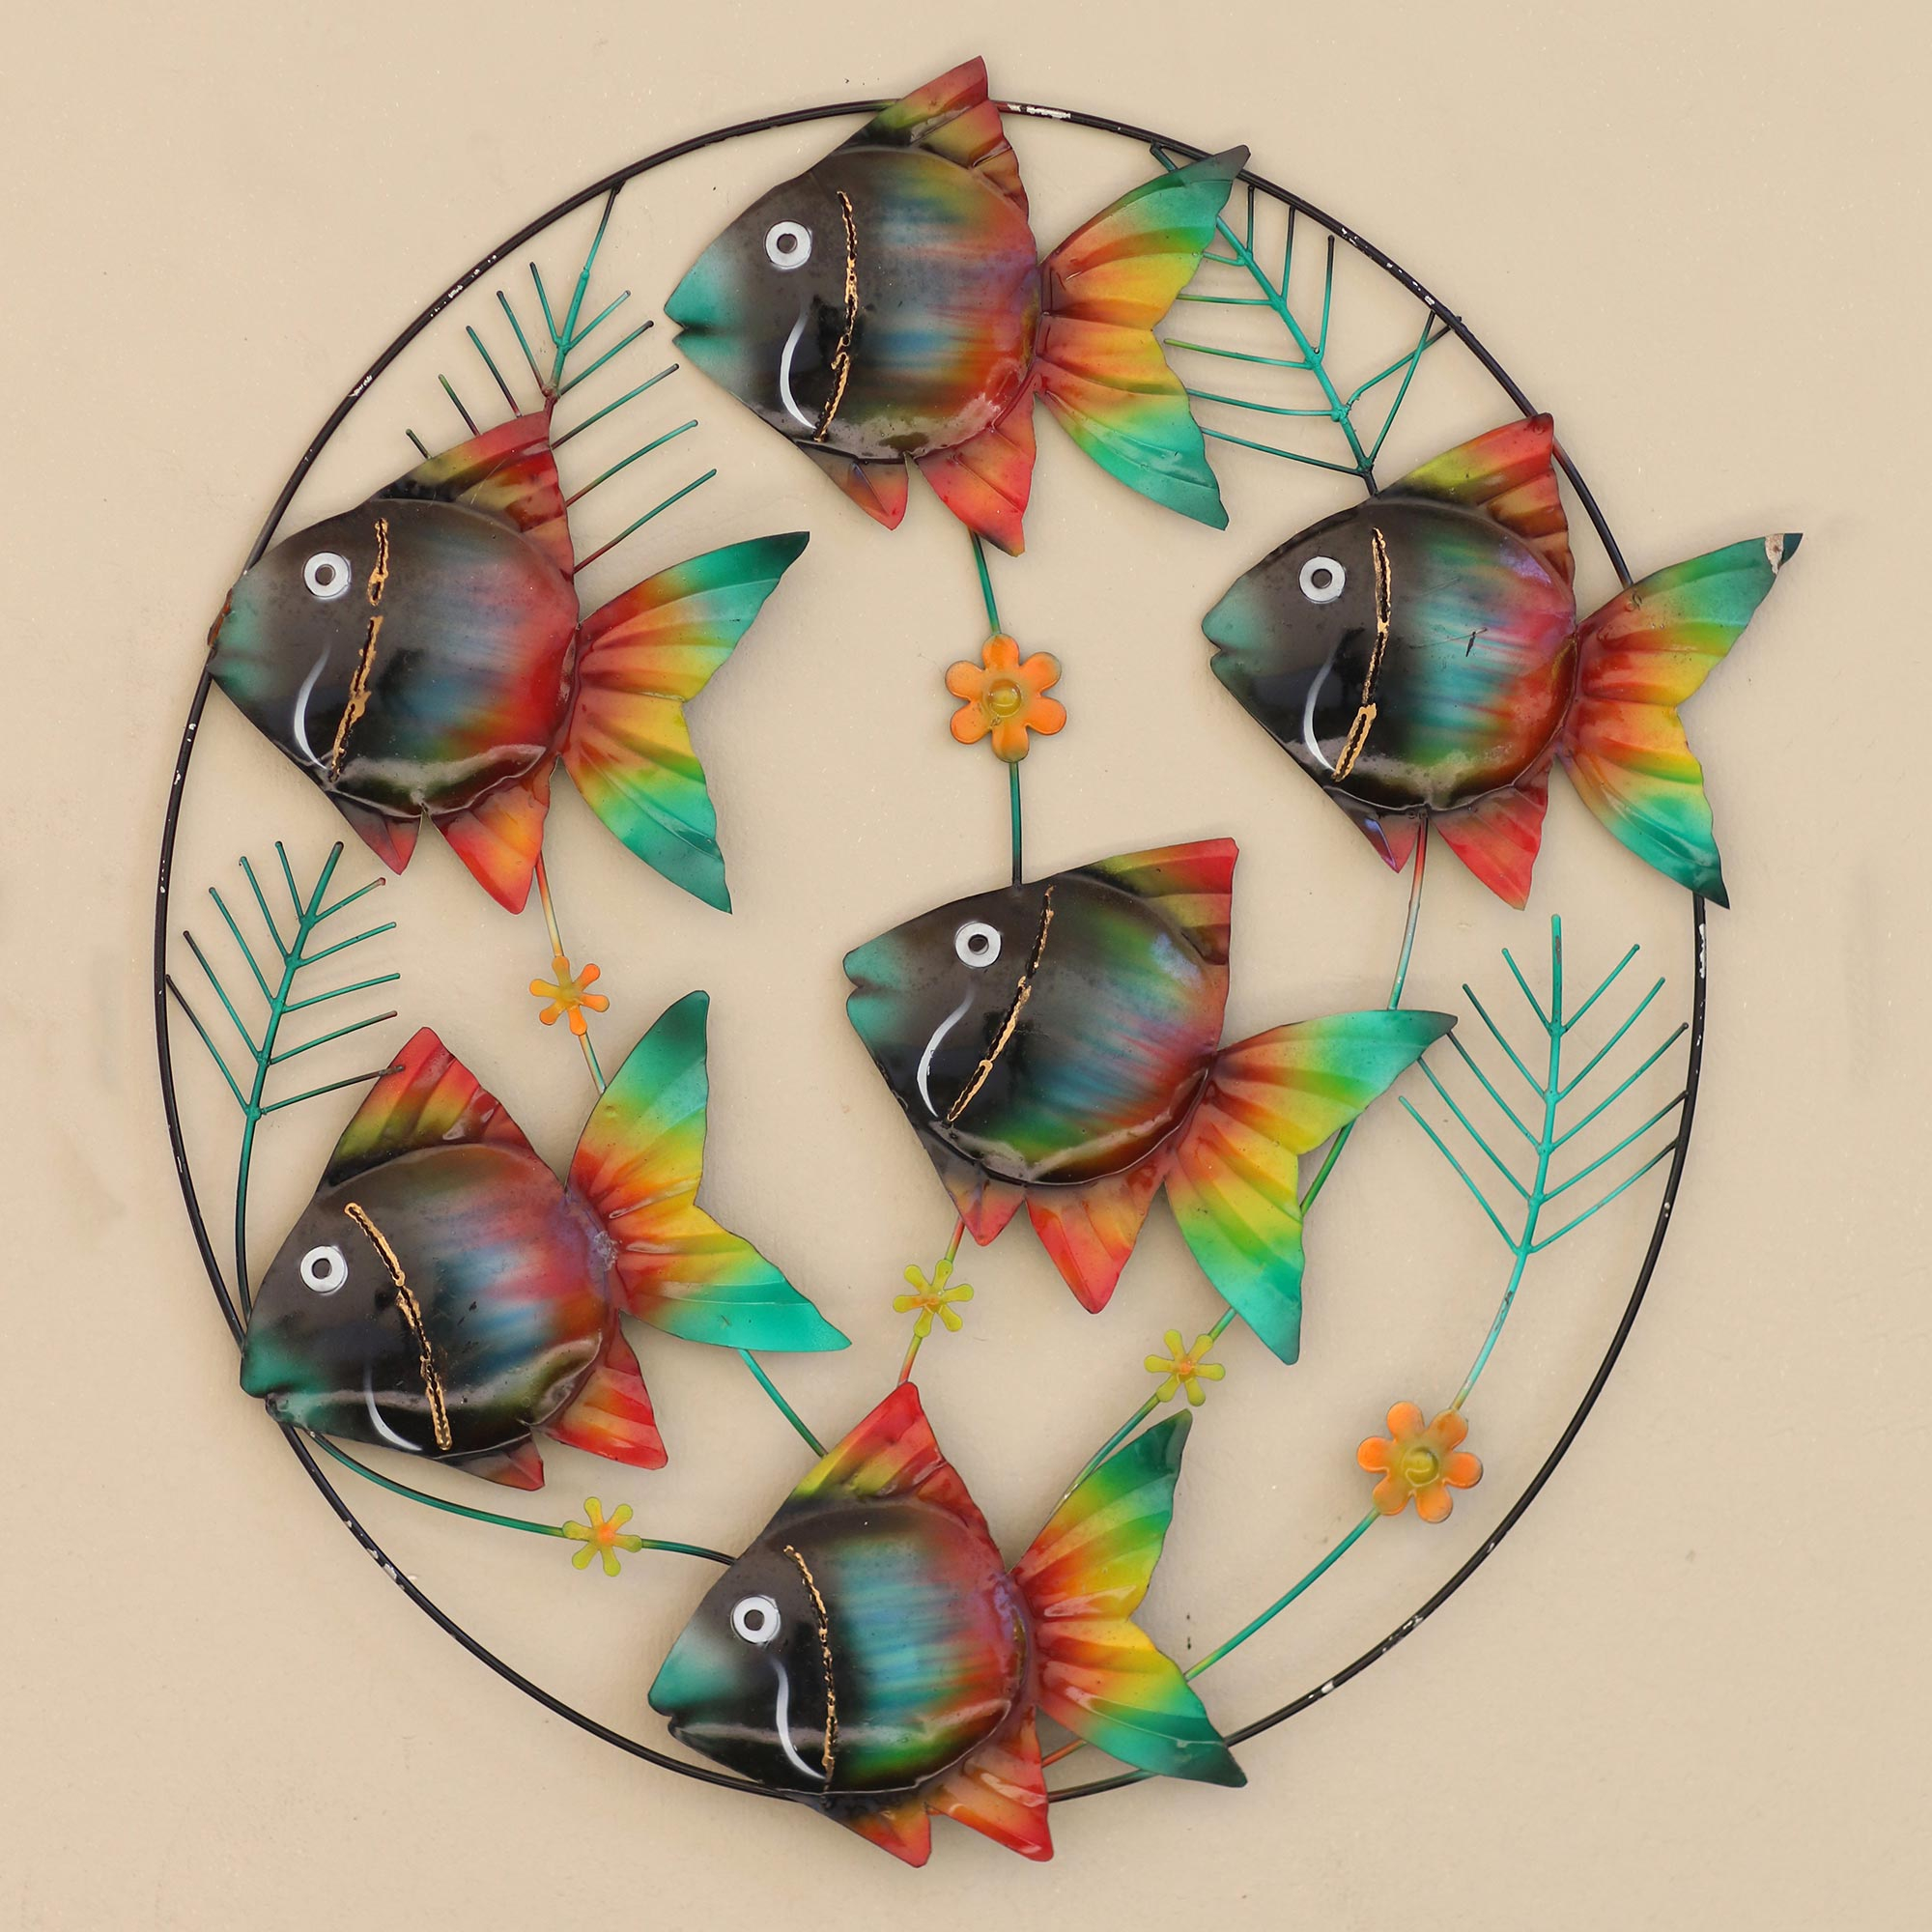 Hand Crafted Metal Wall Sculpture of Tropical Fish - Rainbow School